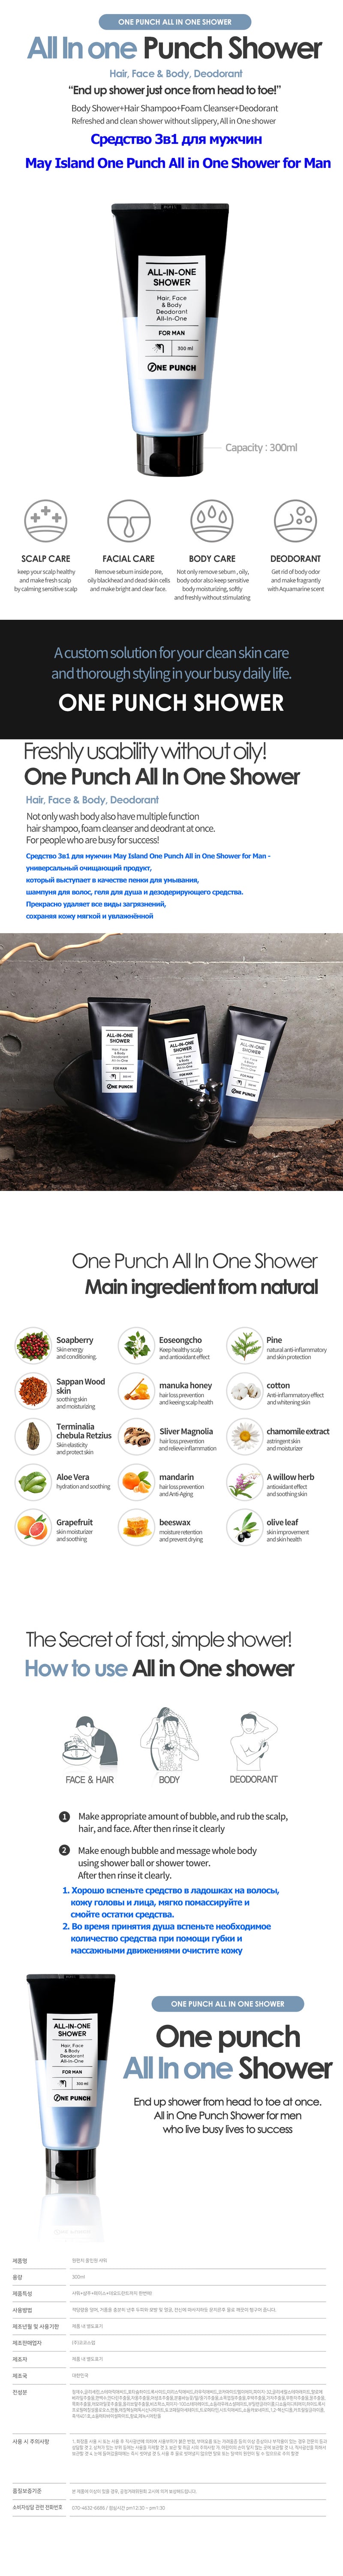 MAY ISLAND One Punch All-In-One Shower 100ml